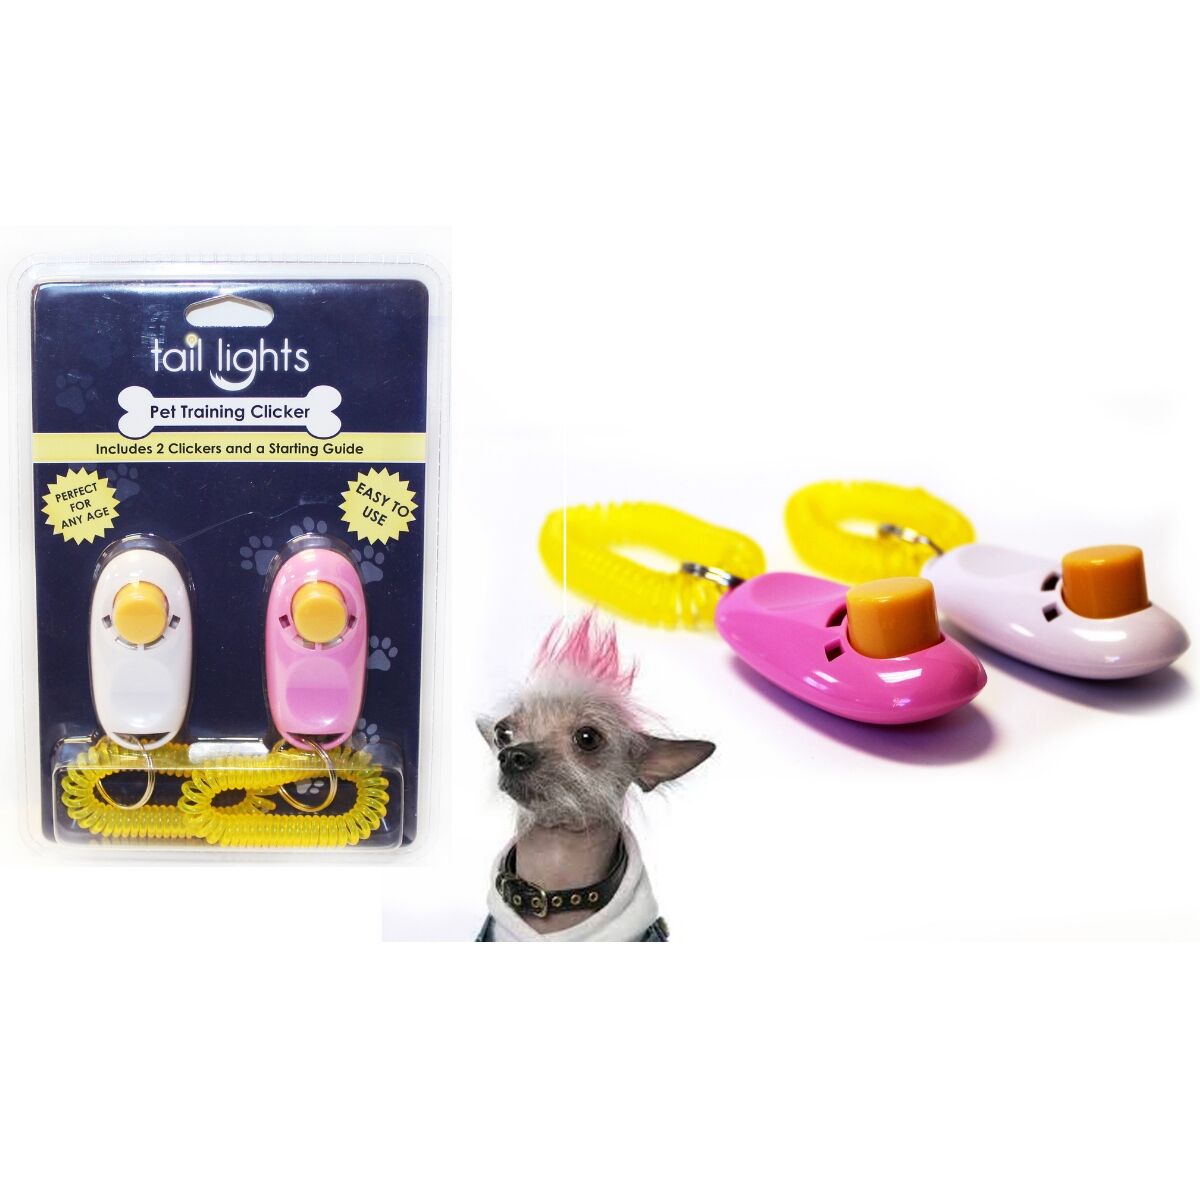 Tl019-2-m1 Tail Lights Pet Training Clickers, White & Pink